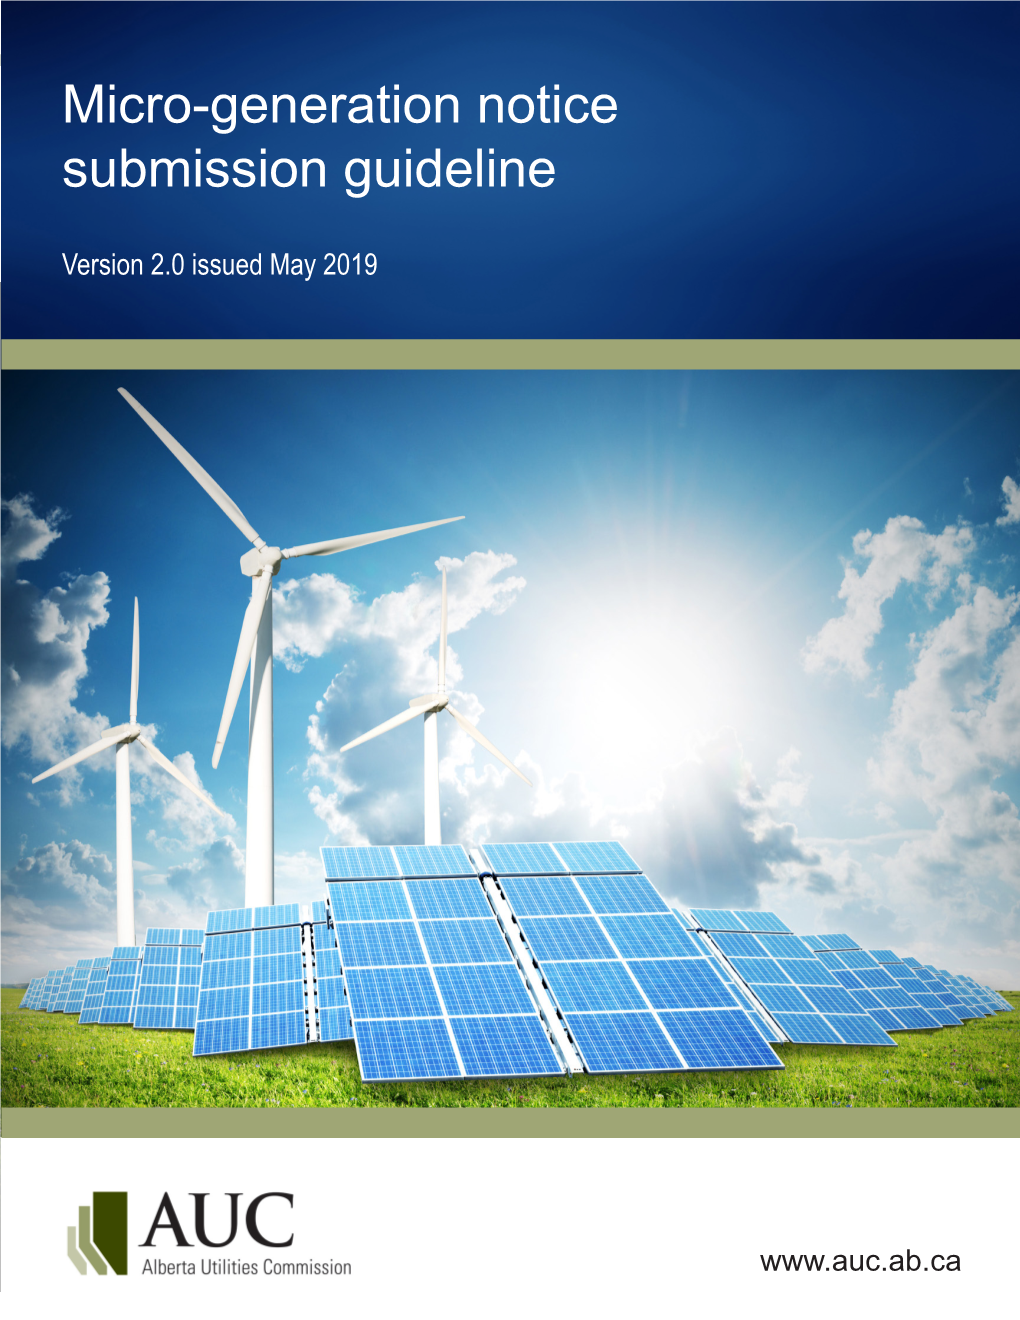 Micro-Generation Notice Submission Guideline Micro-Generation Notice Submission Guideline